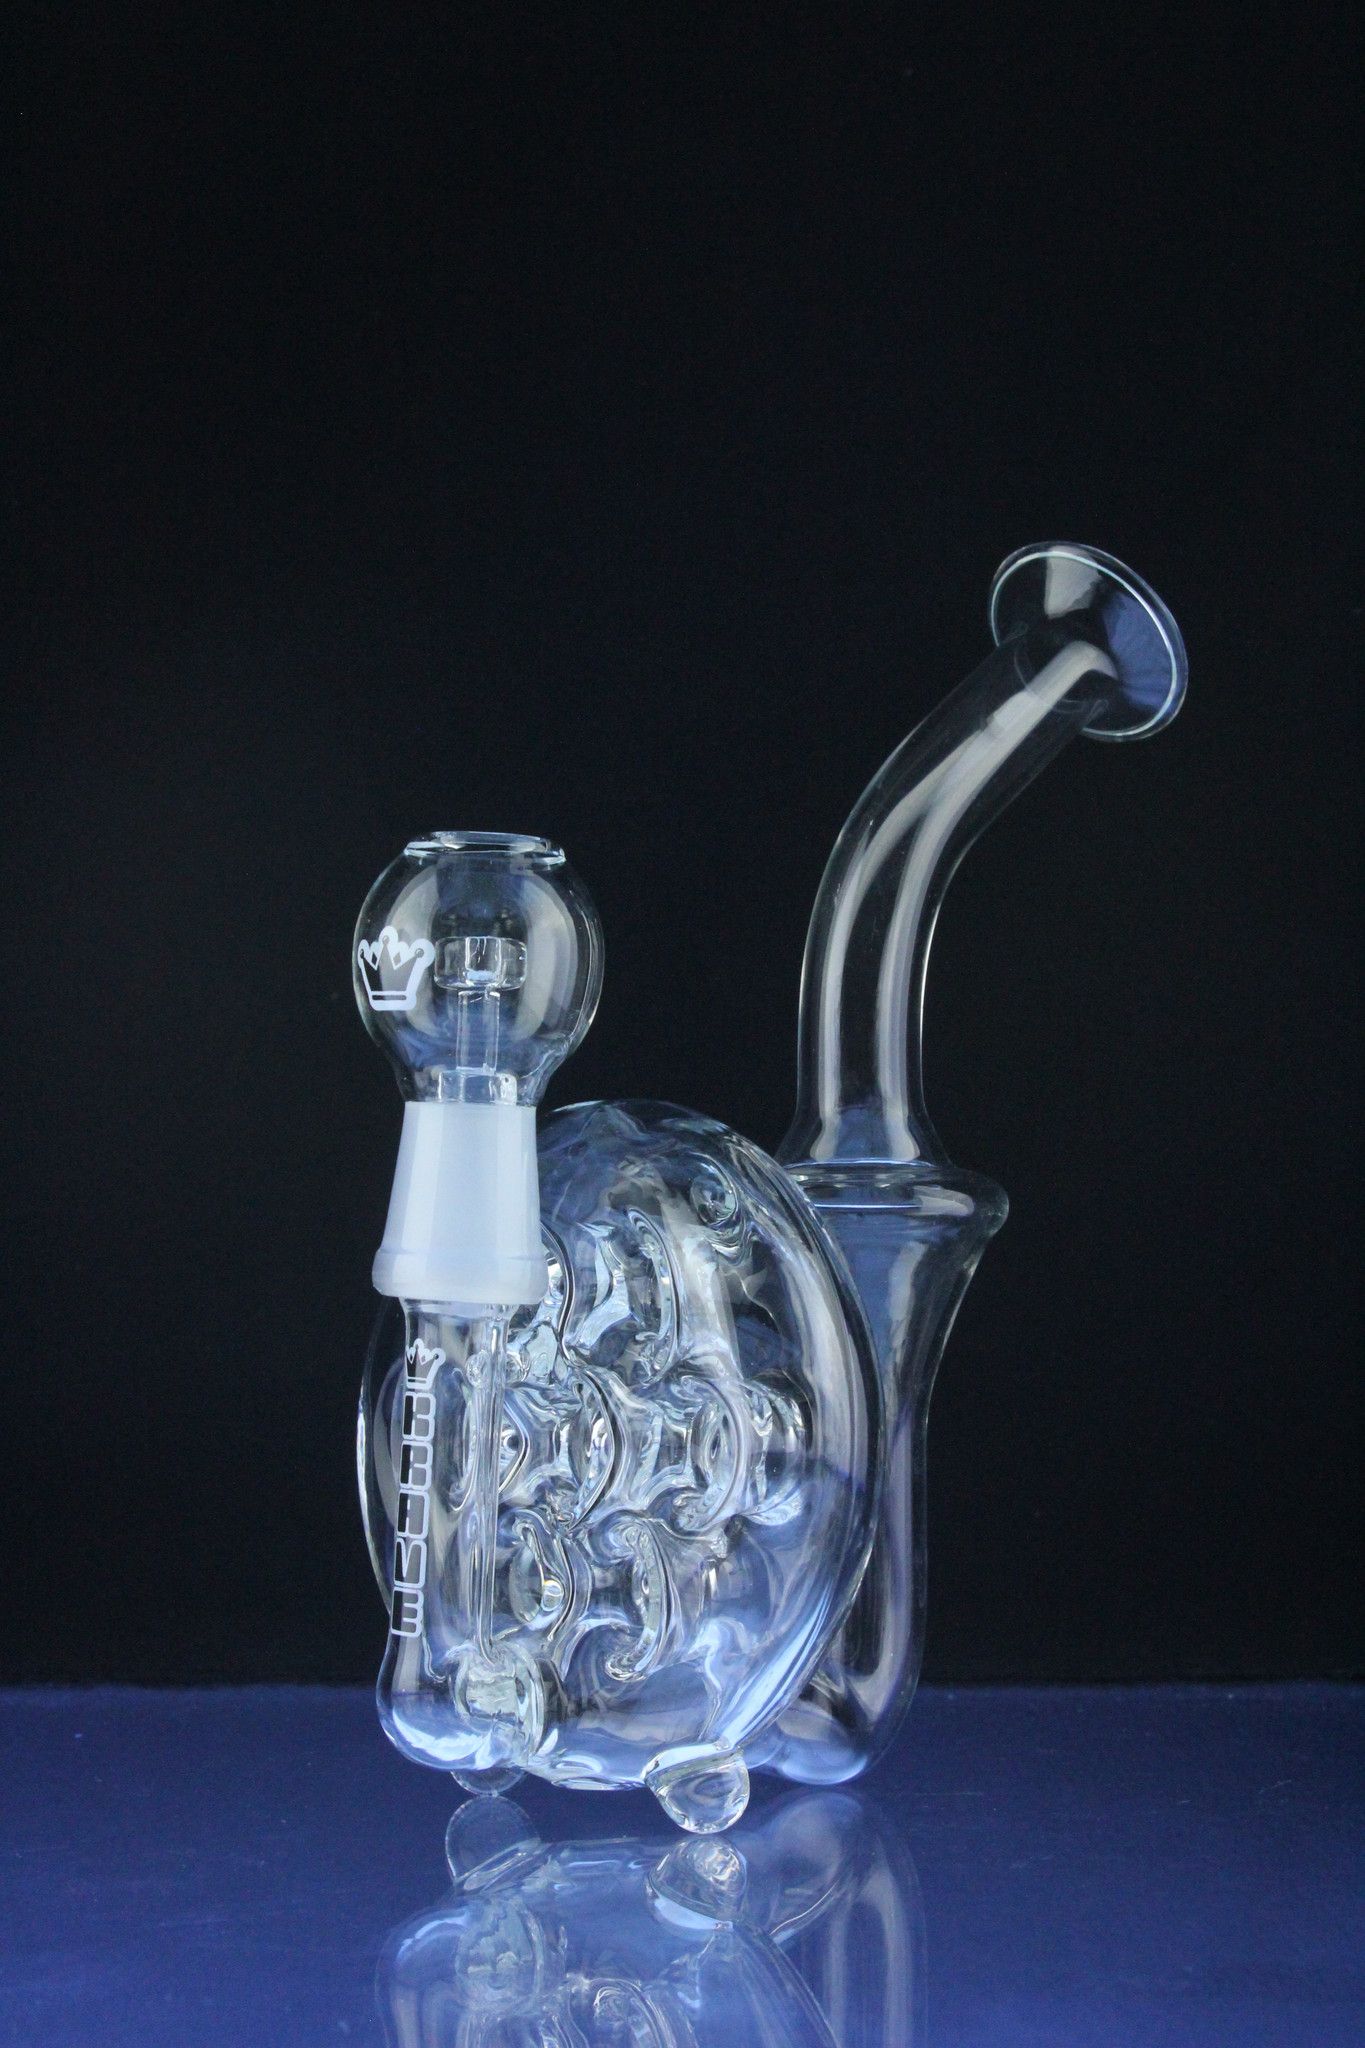 Free%20Shipping%207%20inch%20Swiss%20perc%20glass%20recycler%20concerntrated%20rigs%20glass%20oil%20rigs%20glass%20vapor%20rigs%20glass%20water%20pipes%20with%2014.5%20joint.jpg